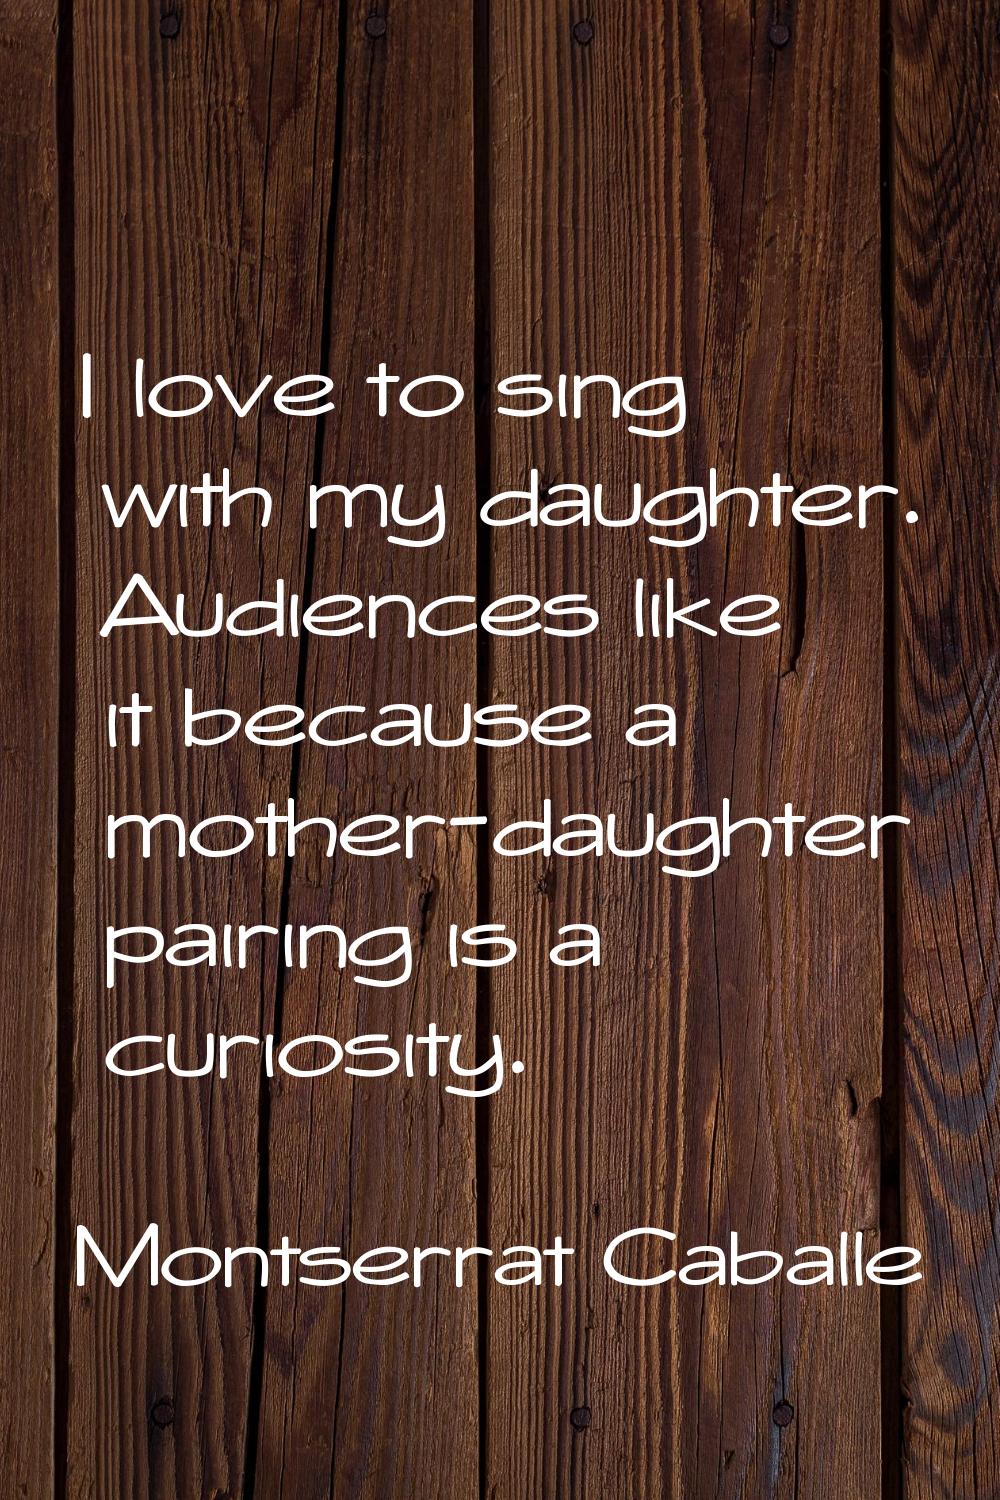 I love to sing with my daughter. Audiences like it because a mother-daughter pairing is a curiosity